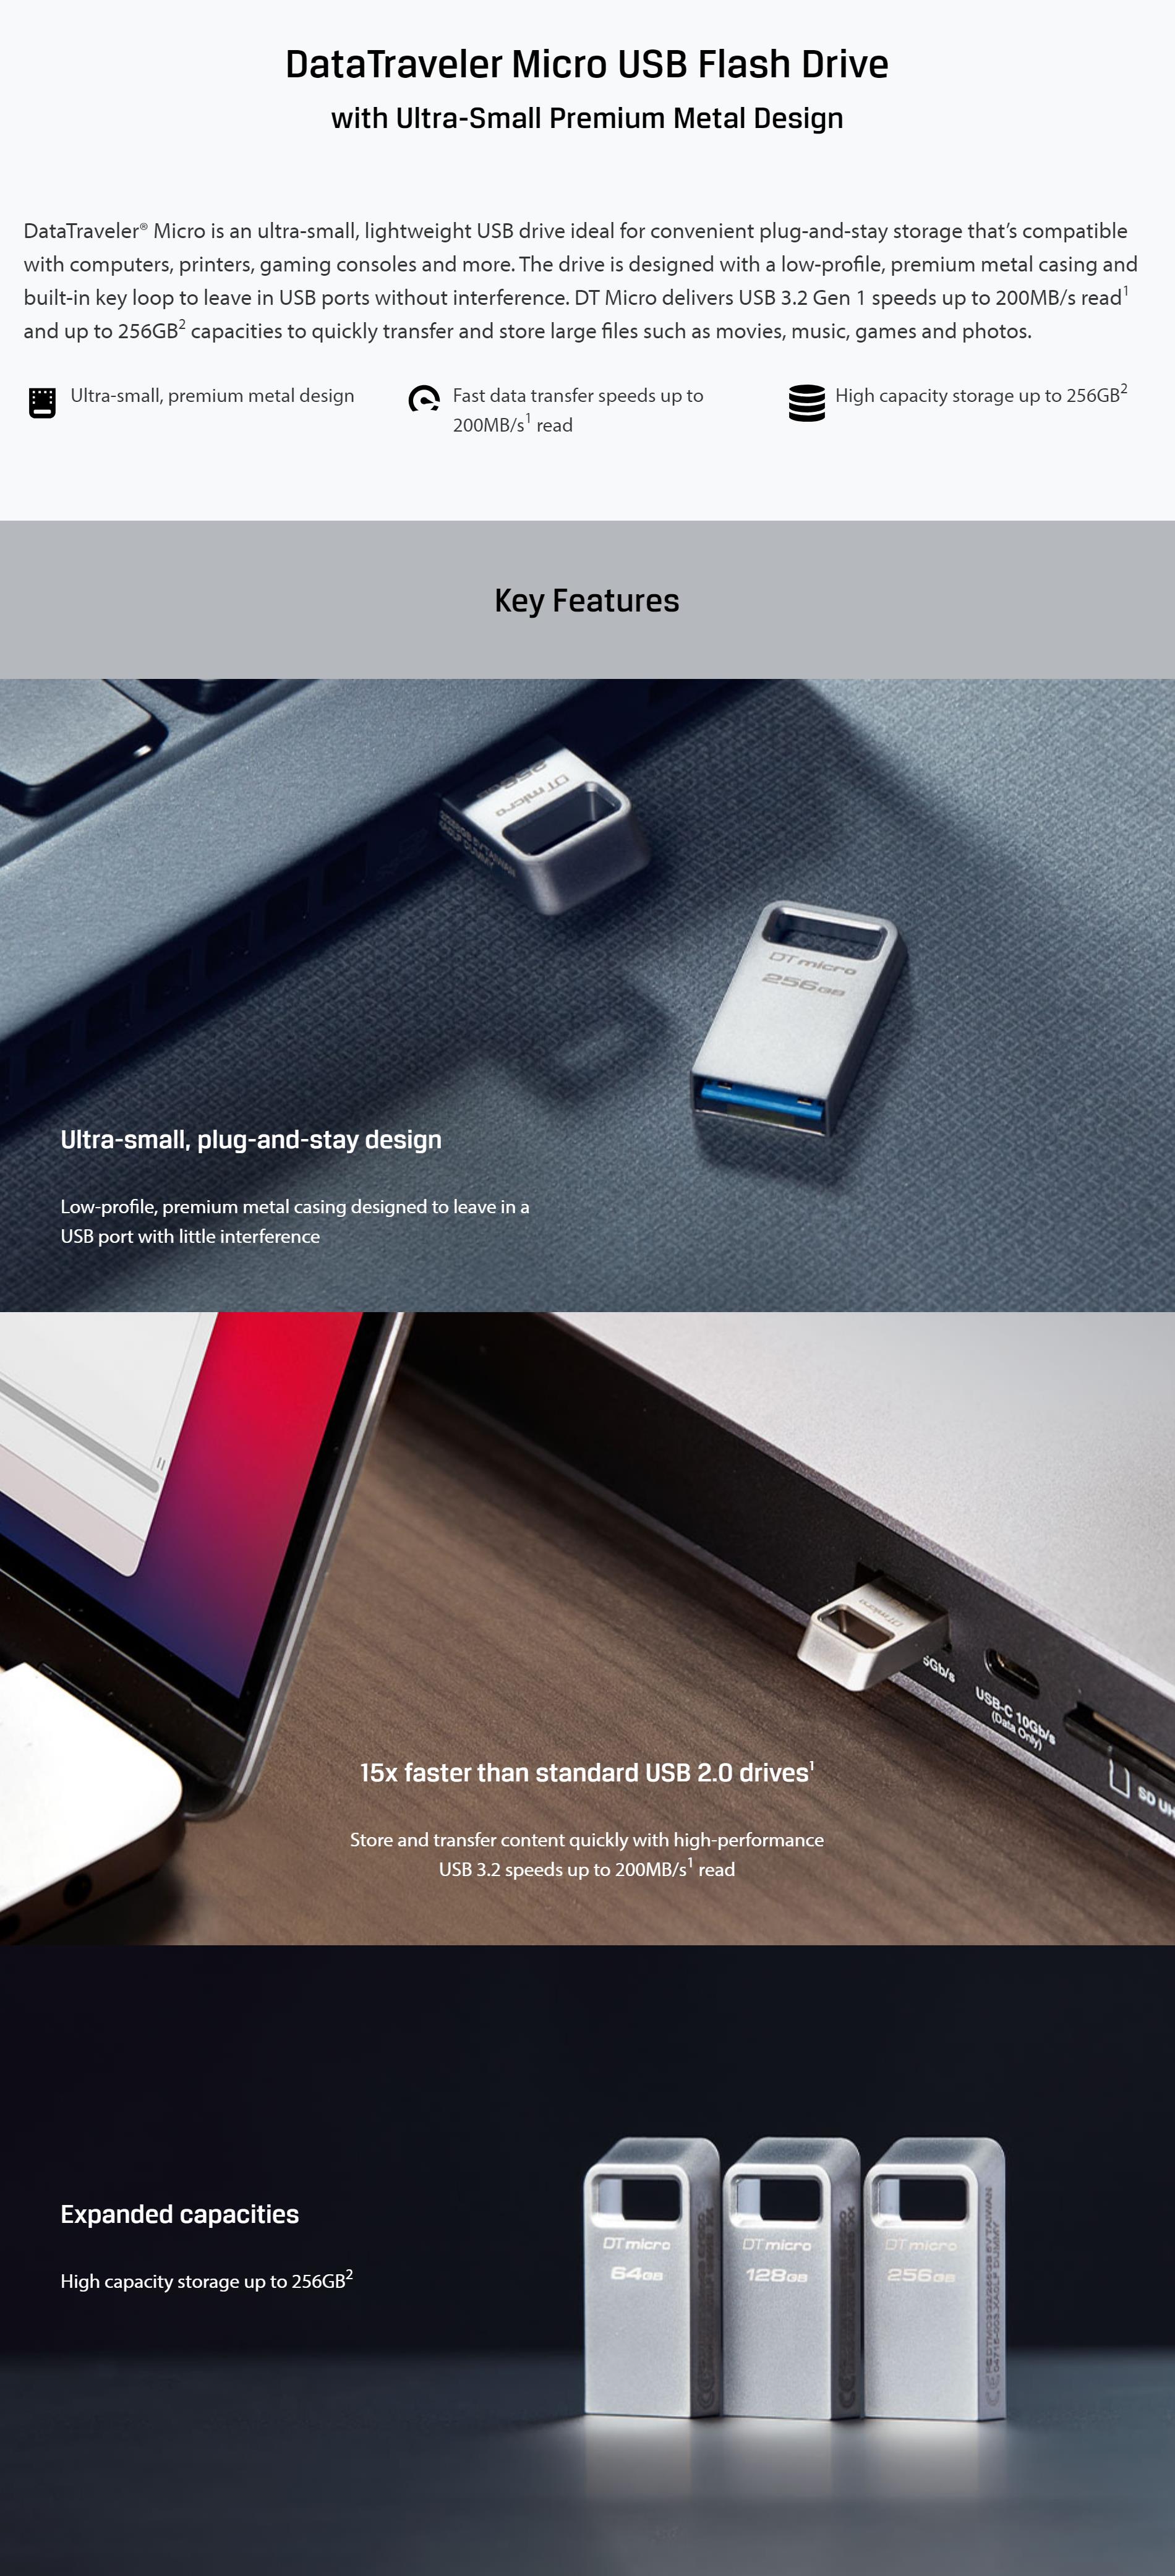 A large marketing image providing additional information about the product Kingston DataTraveler Micro USB 3.2 128GB Flash Drive - Additional alt info not provided